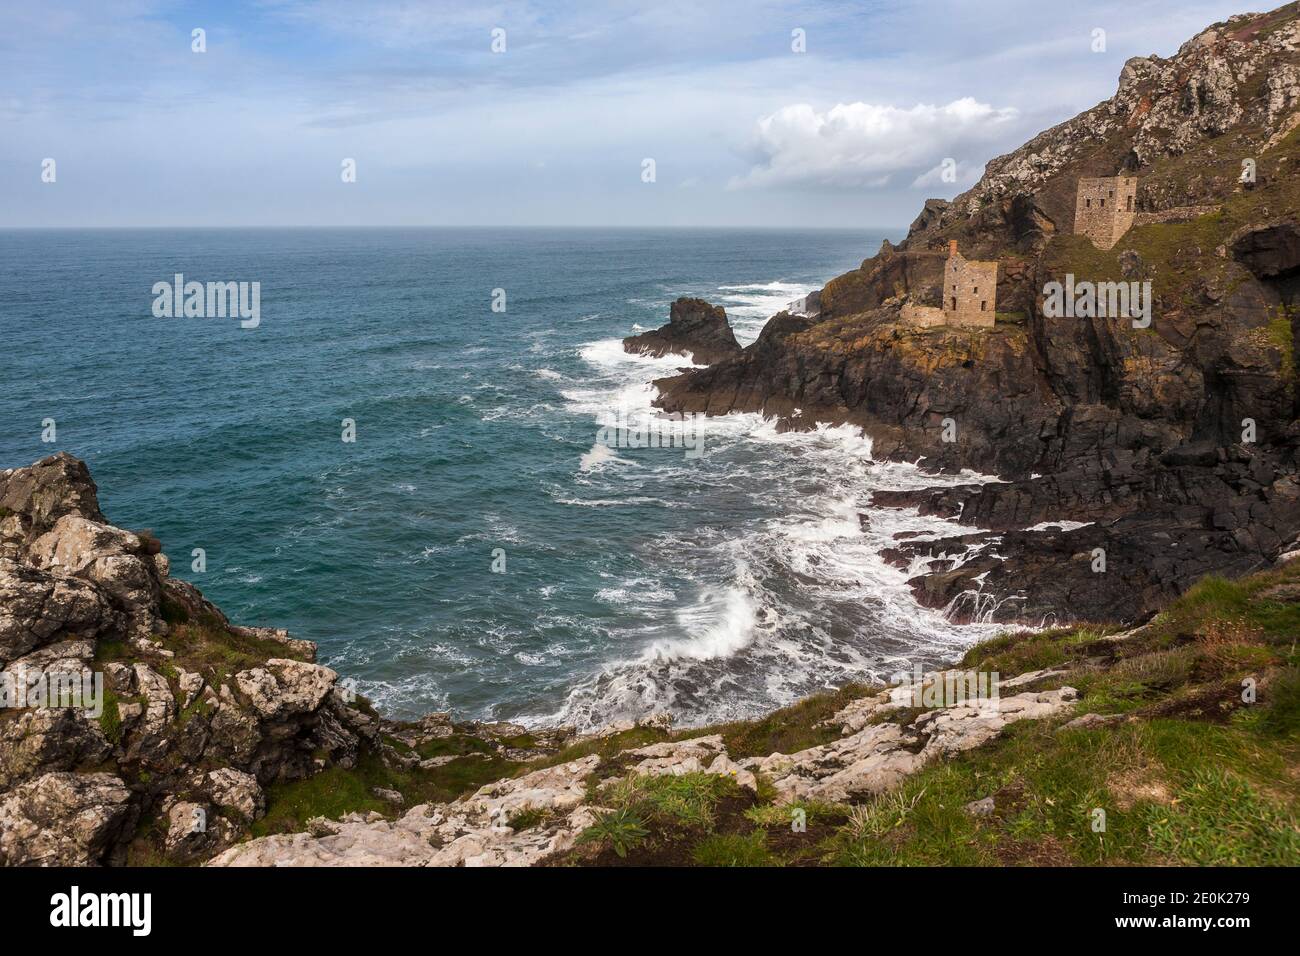 The famed ruins of the Crowns engine houses on the wild Tin Coast: Botallack Mine, St Just, Cornwall, UK. Cornish Mining World Heritage Site. Stock Photo